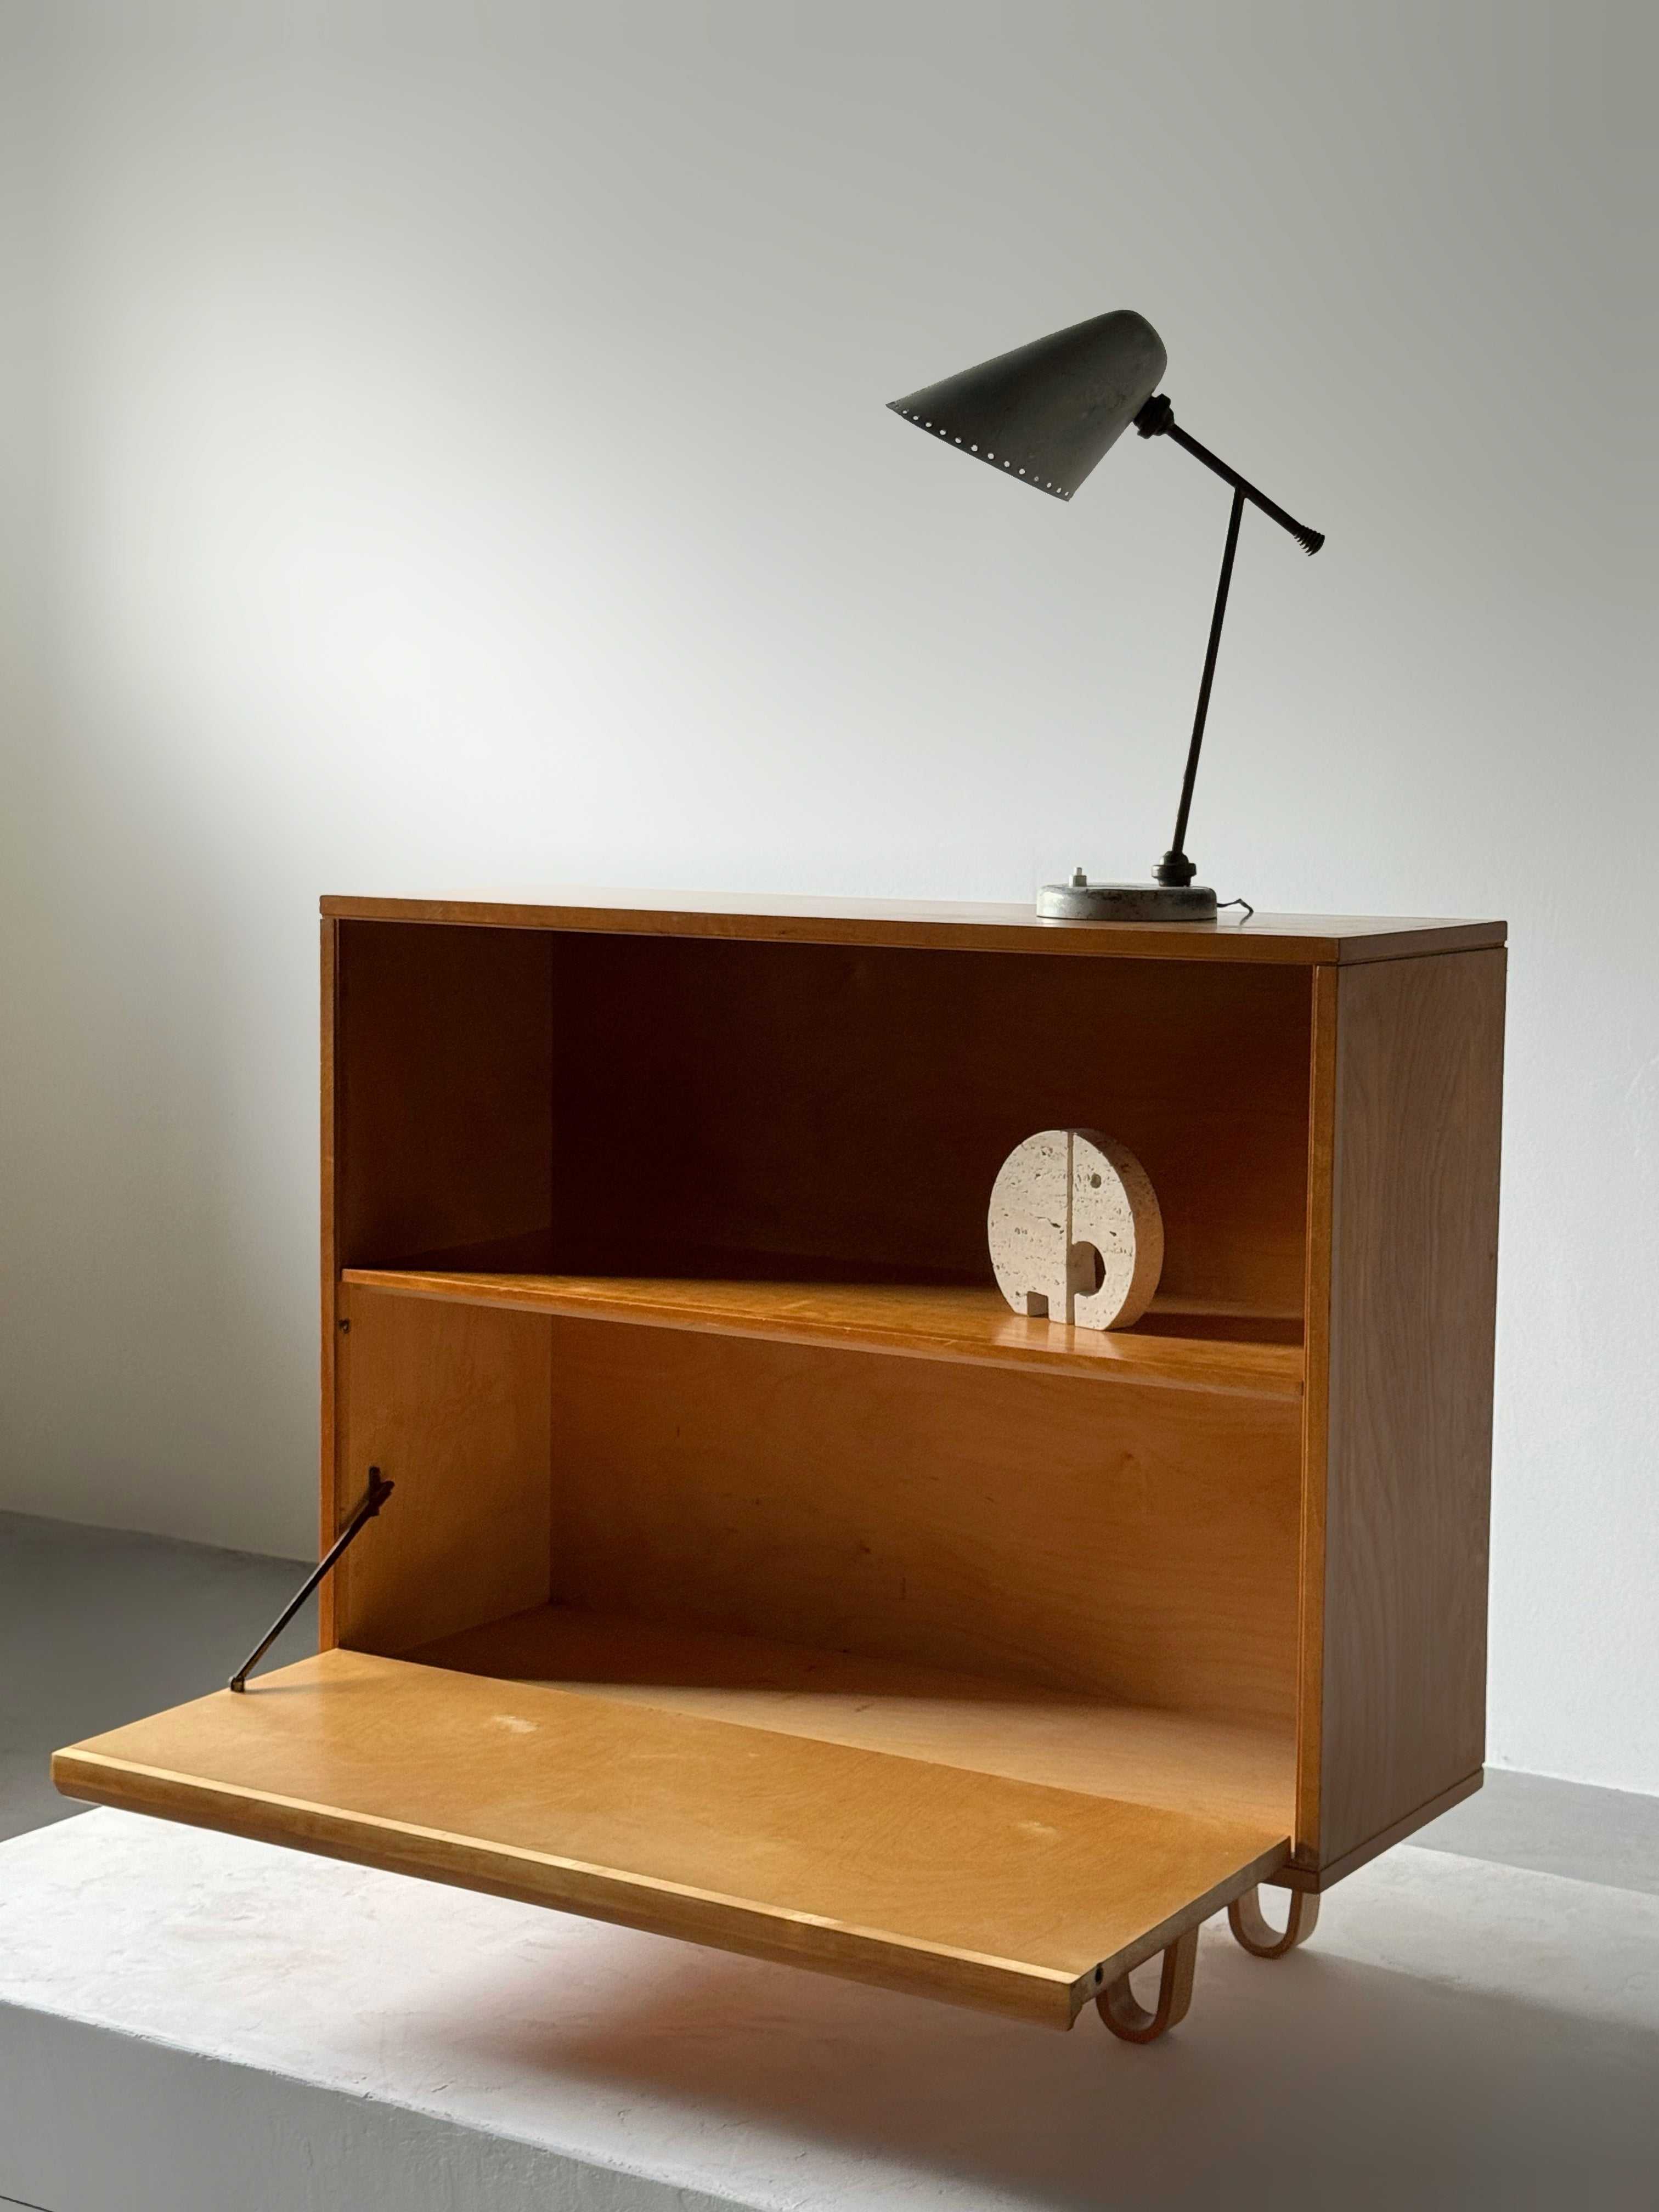 BB05 cabinet by Cees Braakman for Pastoe, 1950s